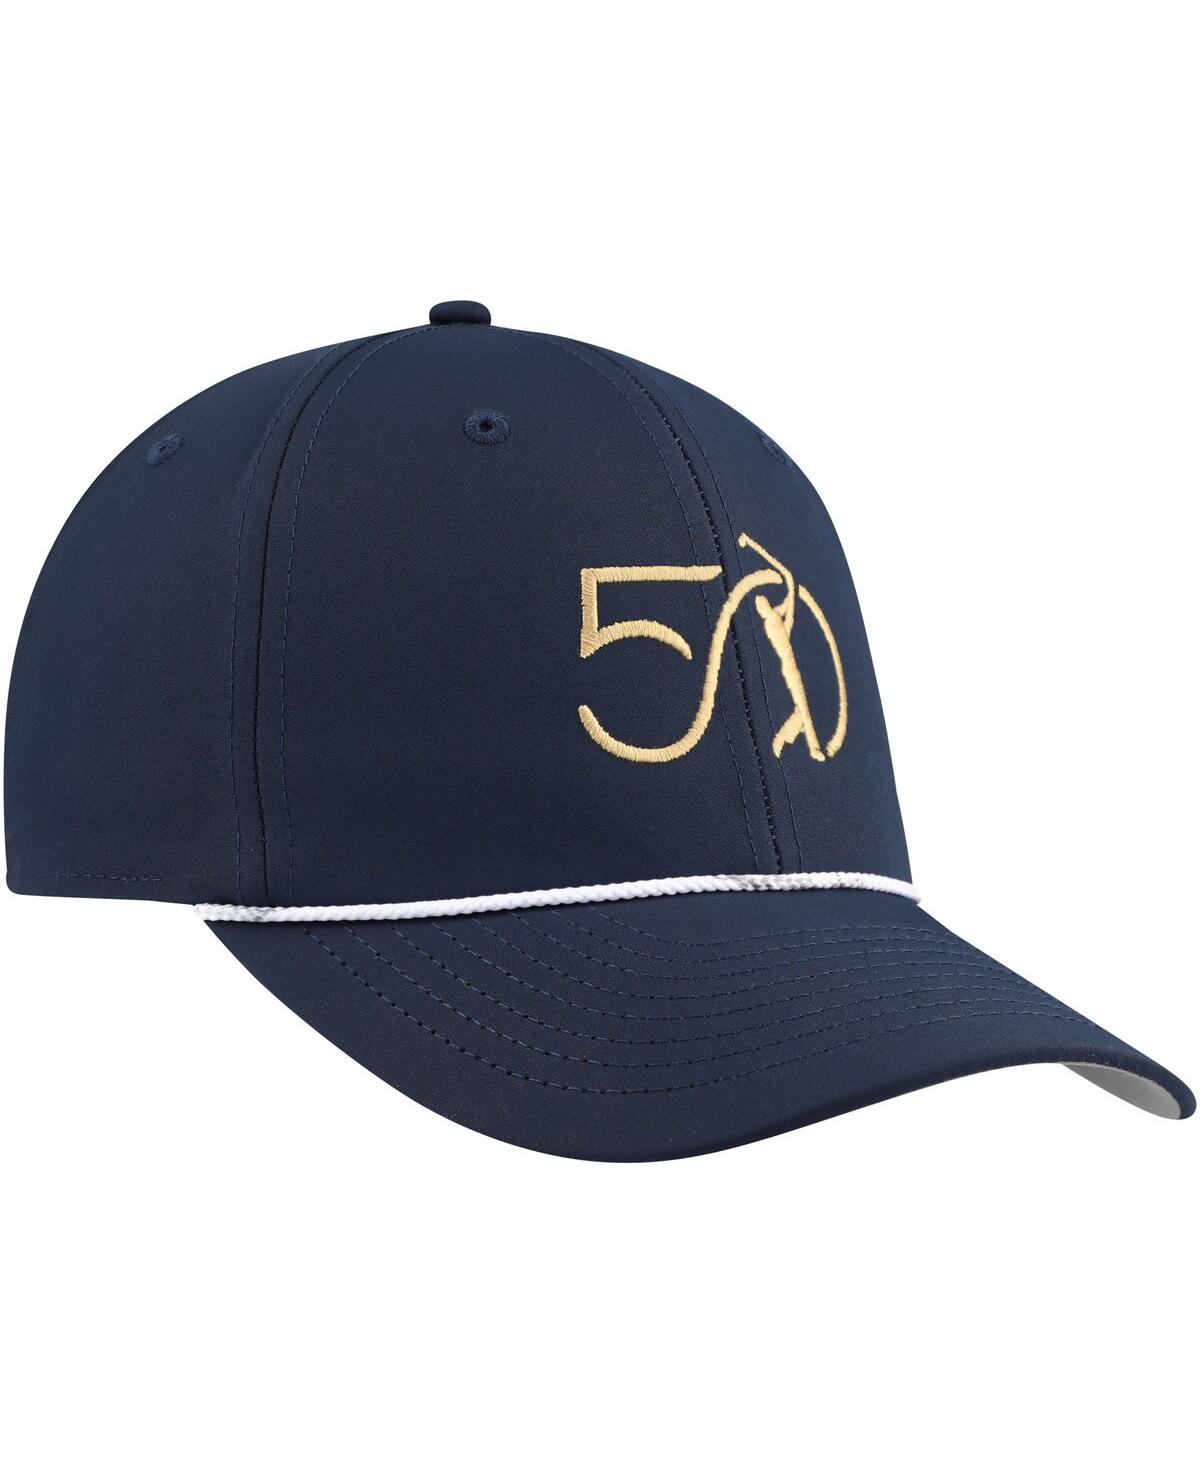 Men's Navy The Players 50th Anniversary The Wingman Rope Adjustable Hat - Navy